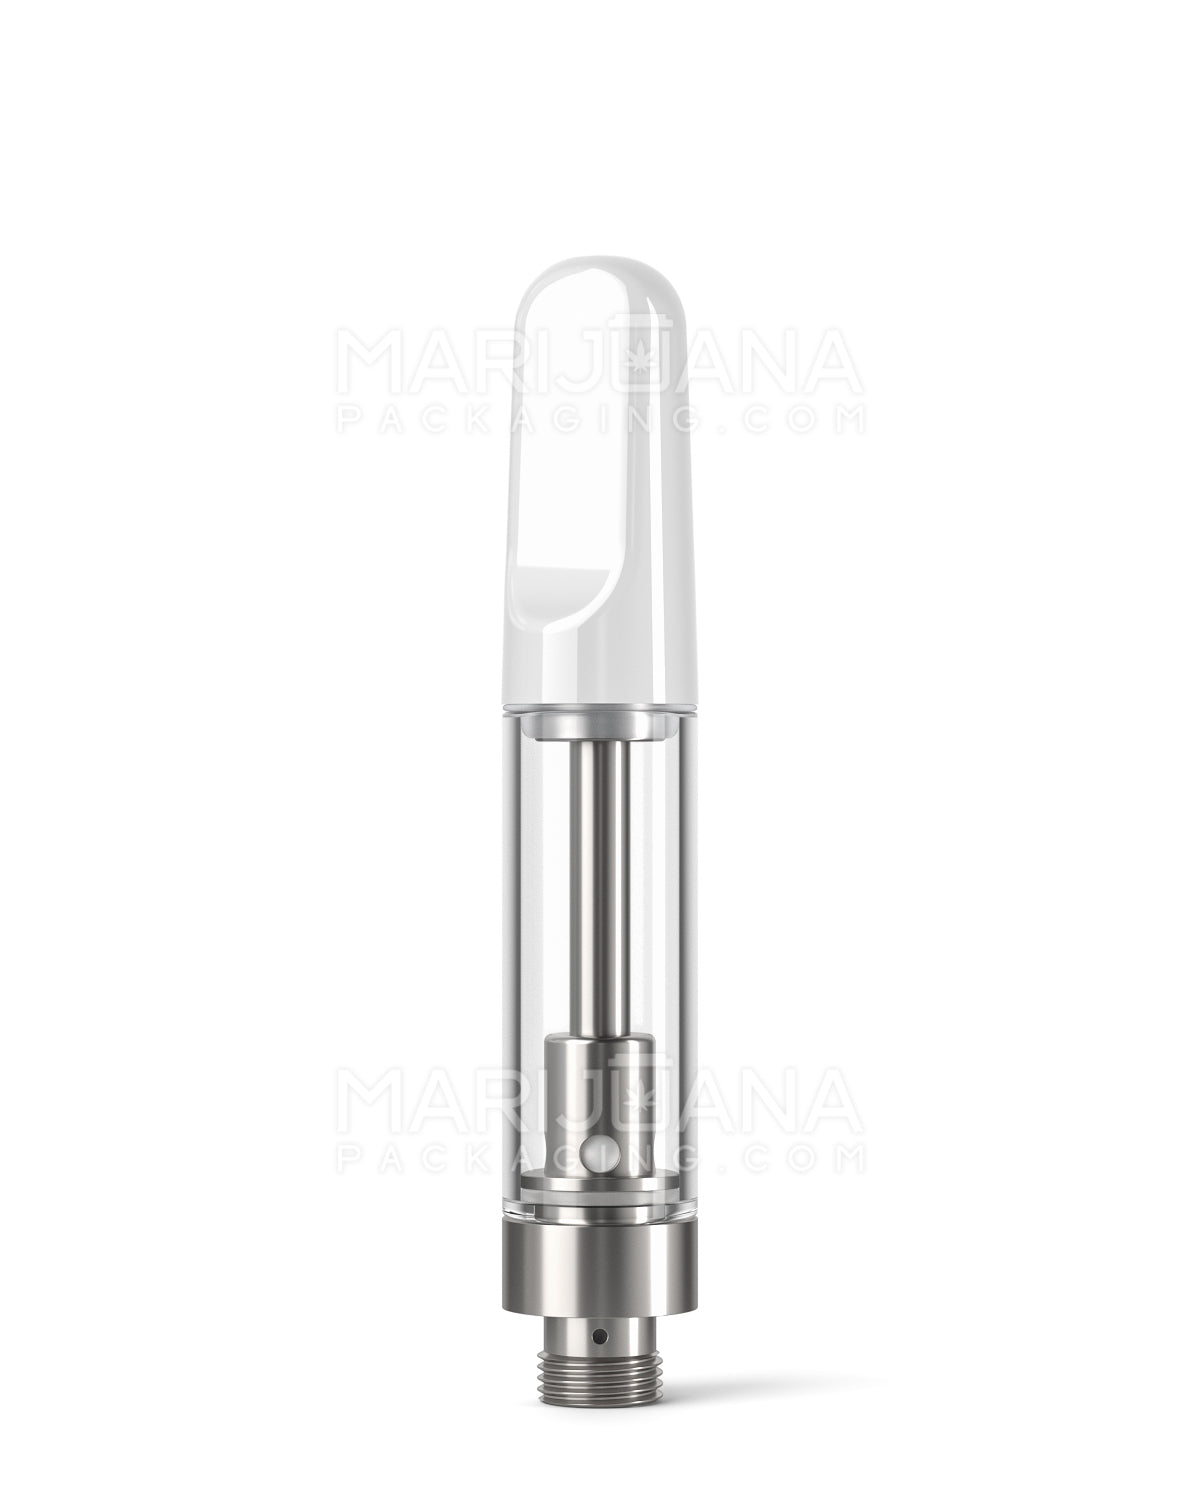 CCELL | Liquid6 Reactor Glass Vape Cartridge with White Ceramic Mouthpiece | 1mL - Screw On - 100 Count - 1